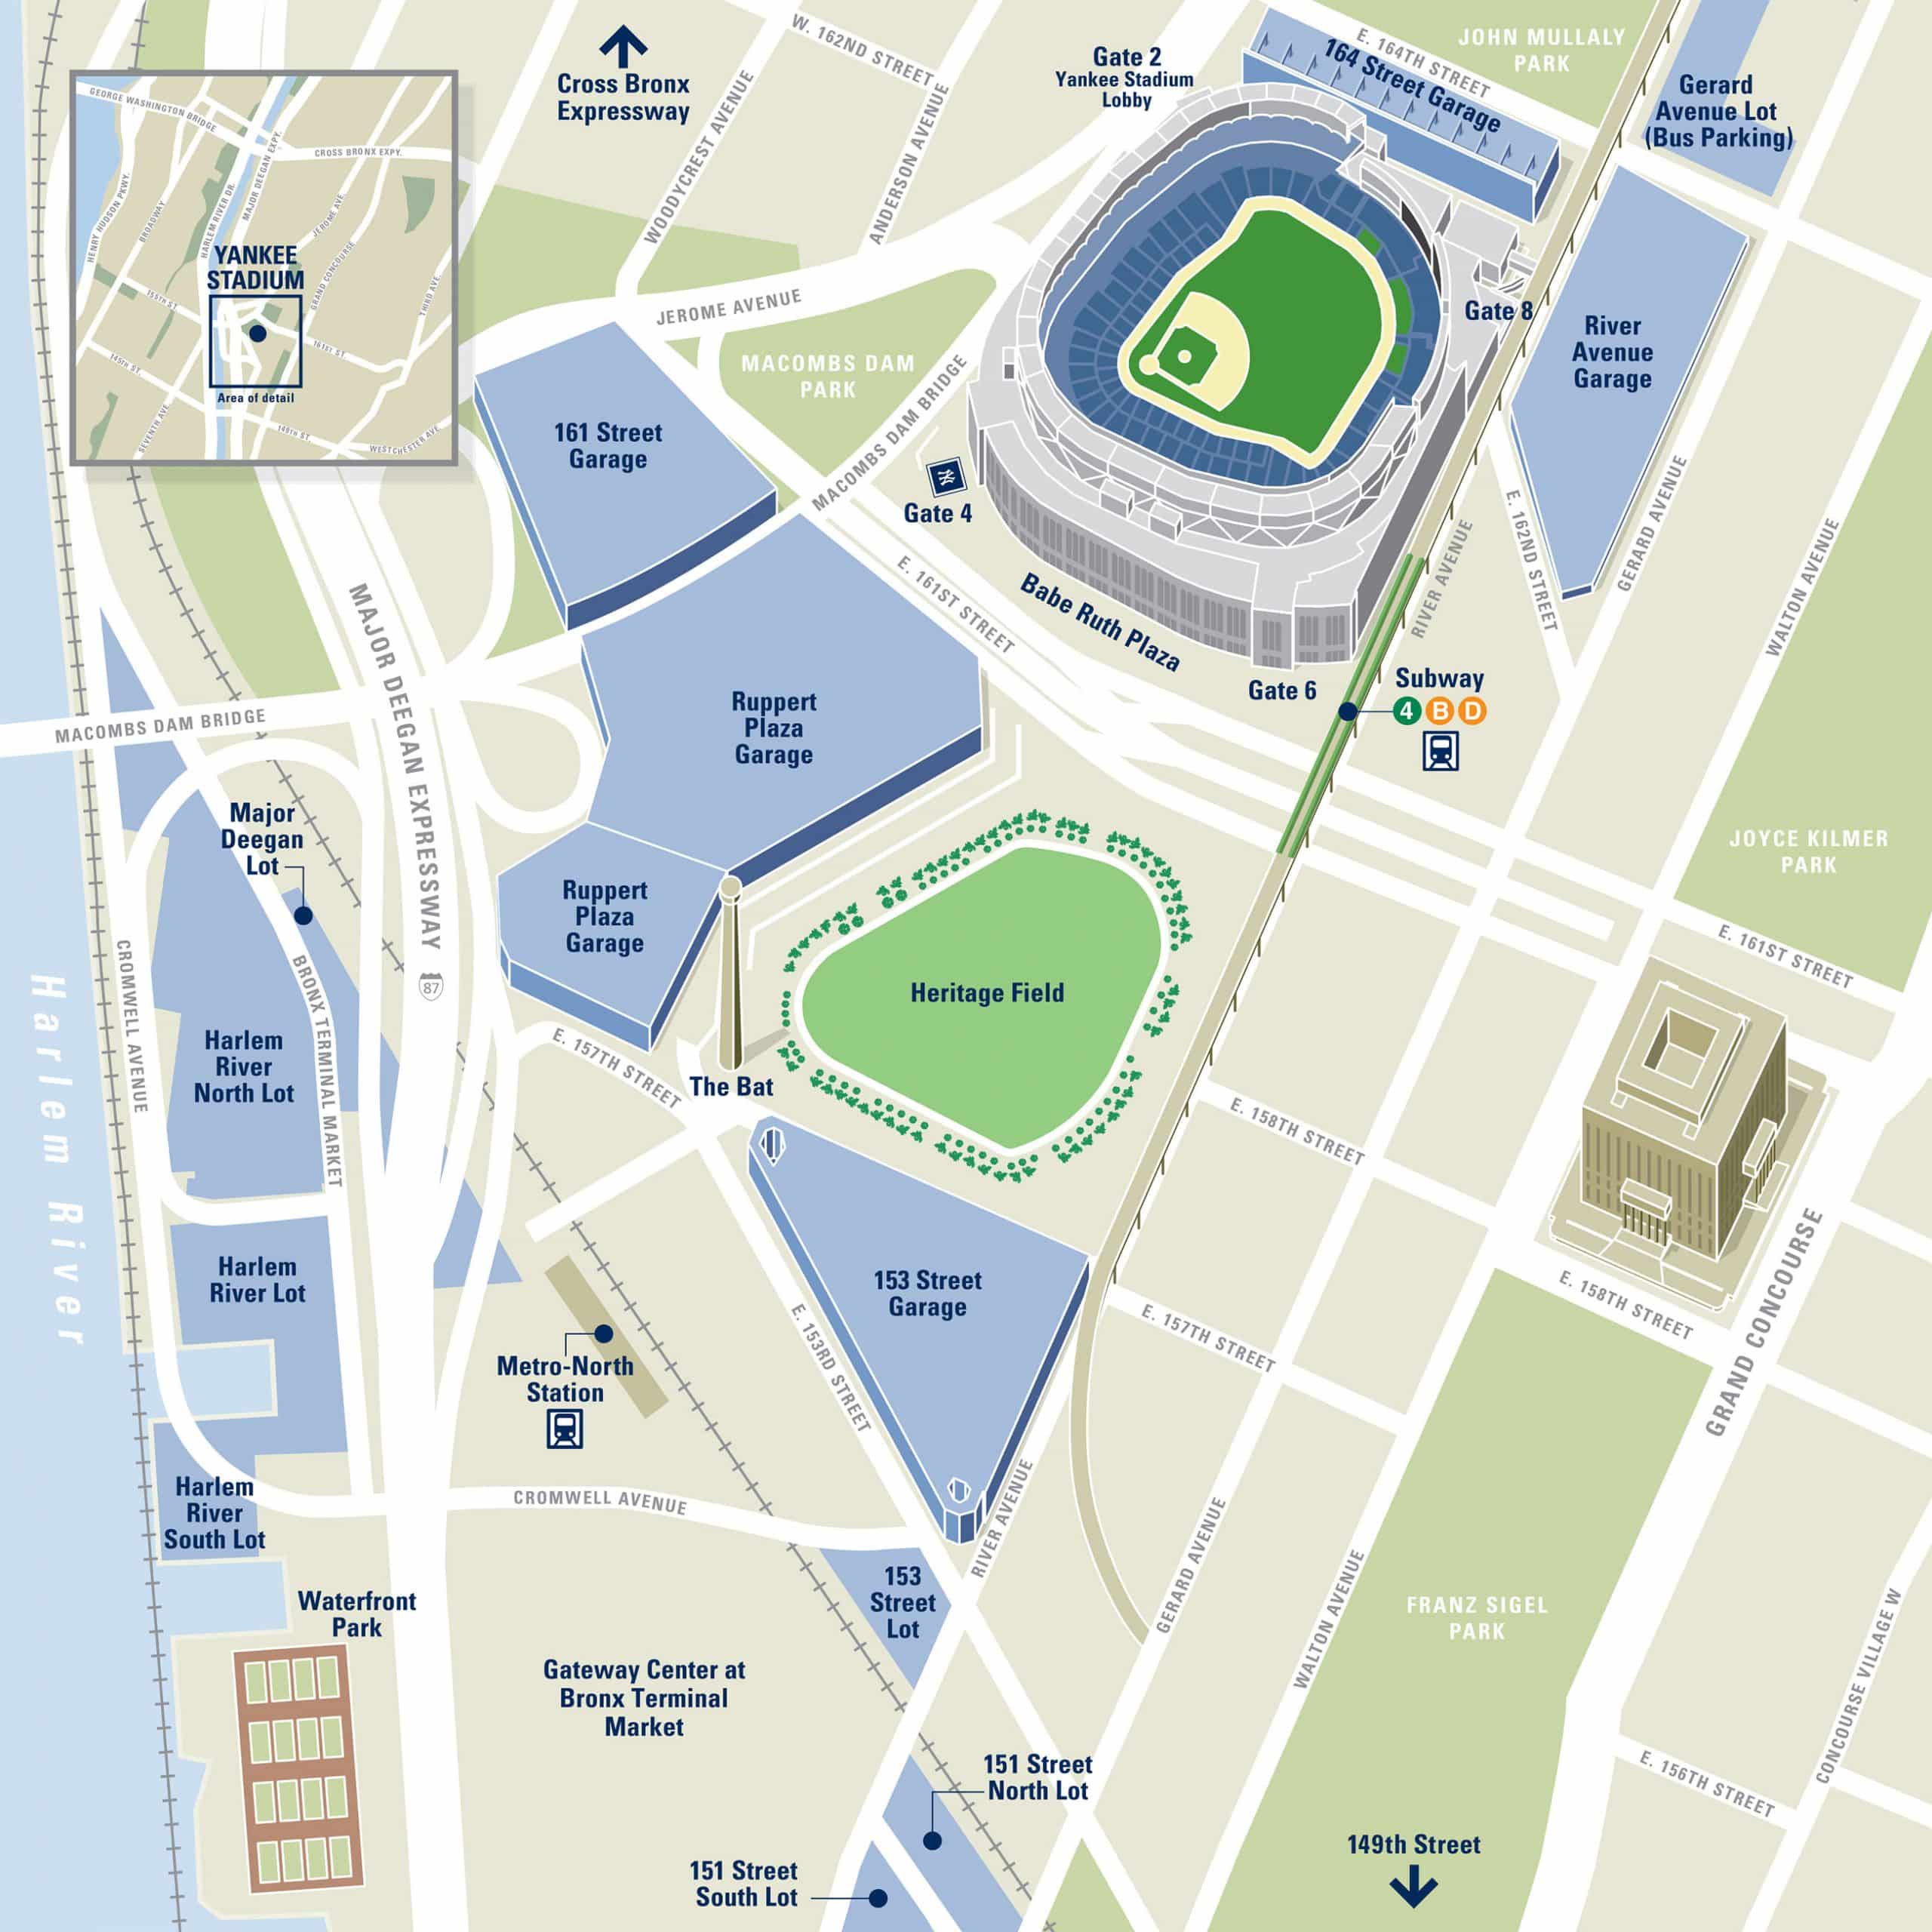 Yankee Stadium Directions and Parking Info